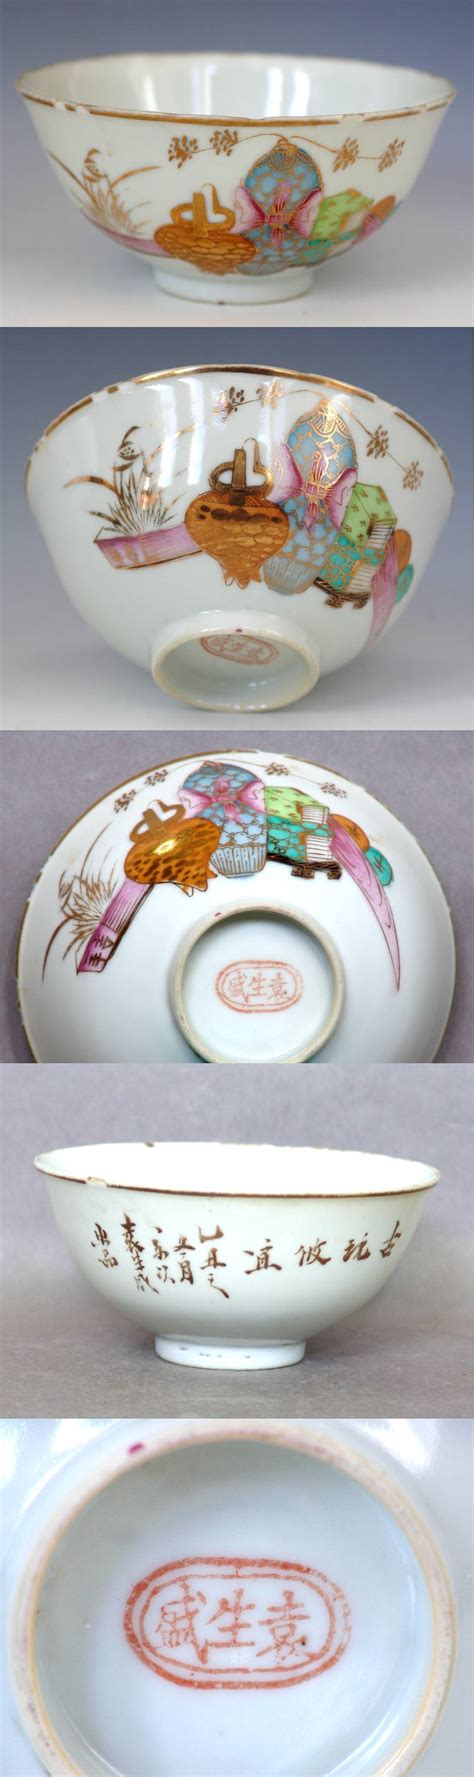 Marks On Chinese Porcelain Dated Chinese Porcelain